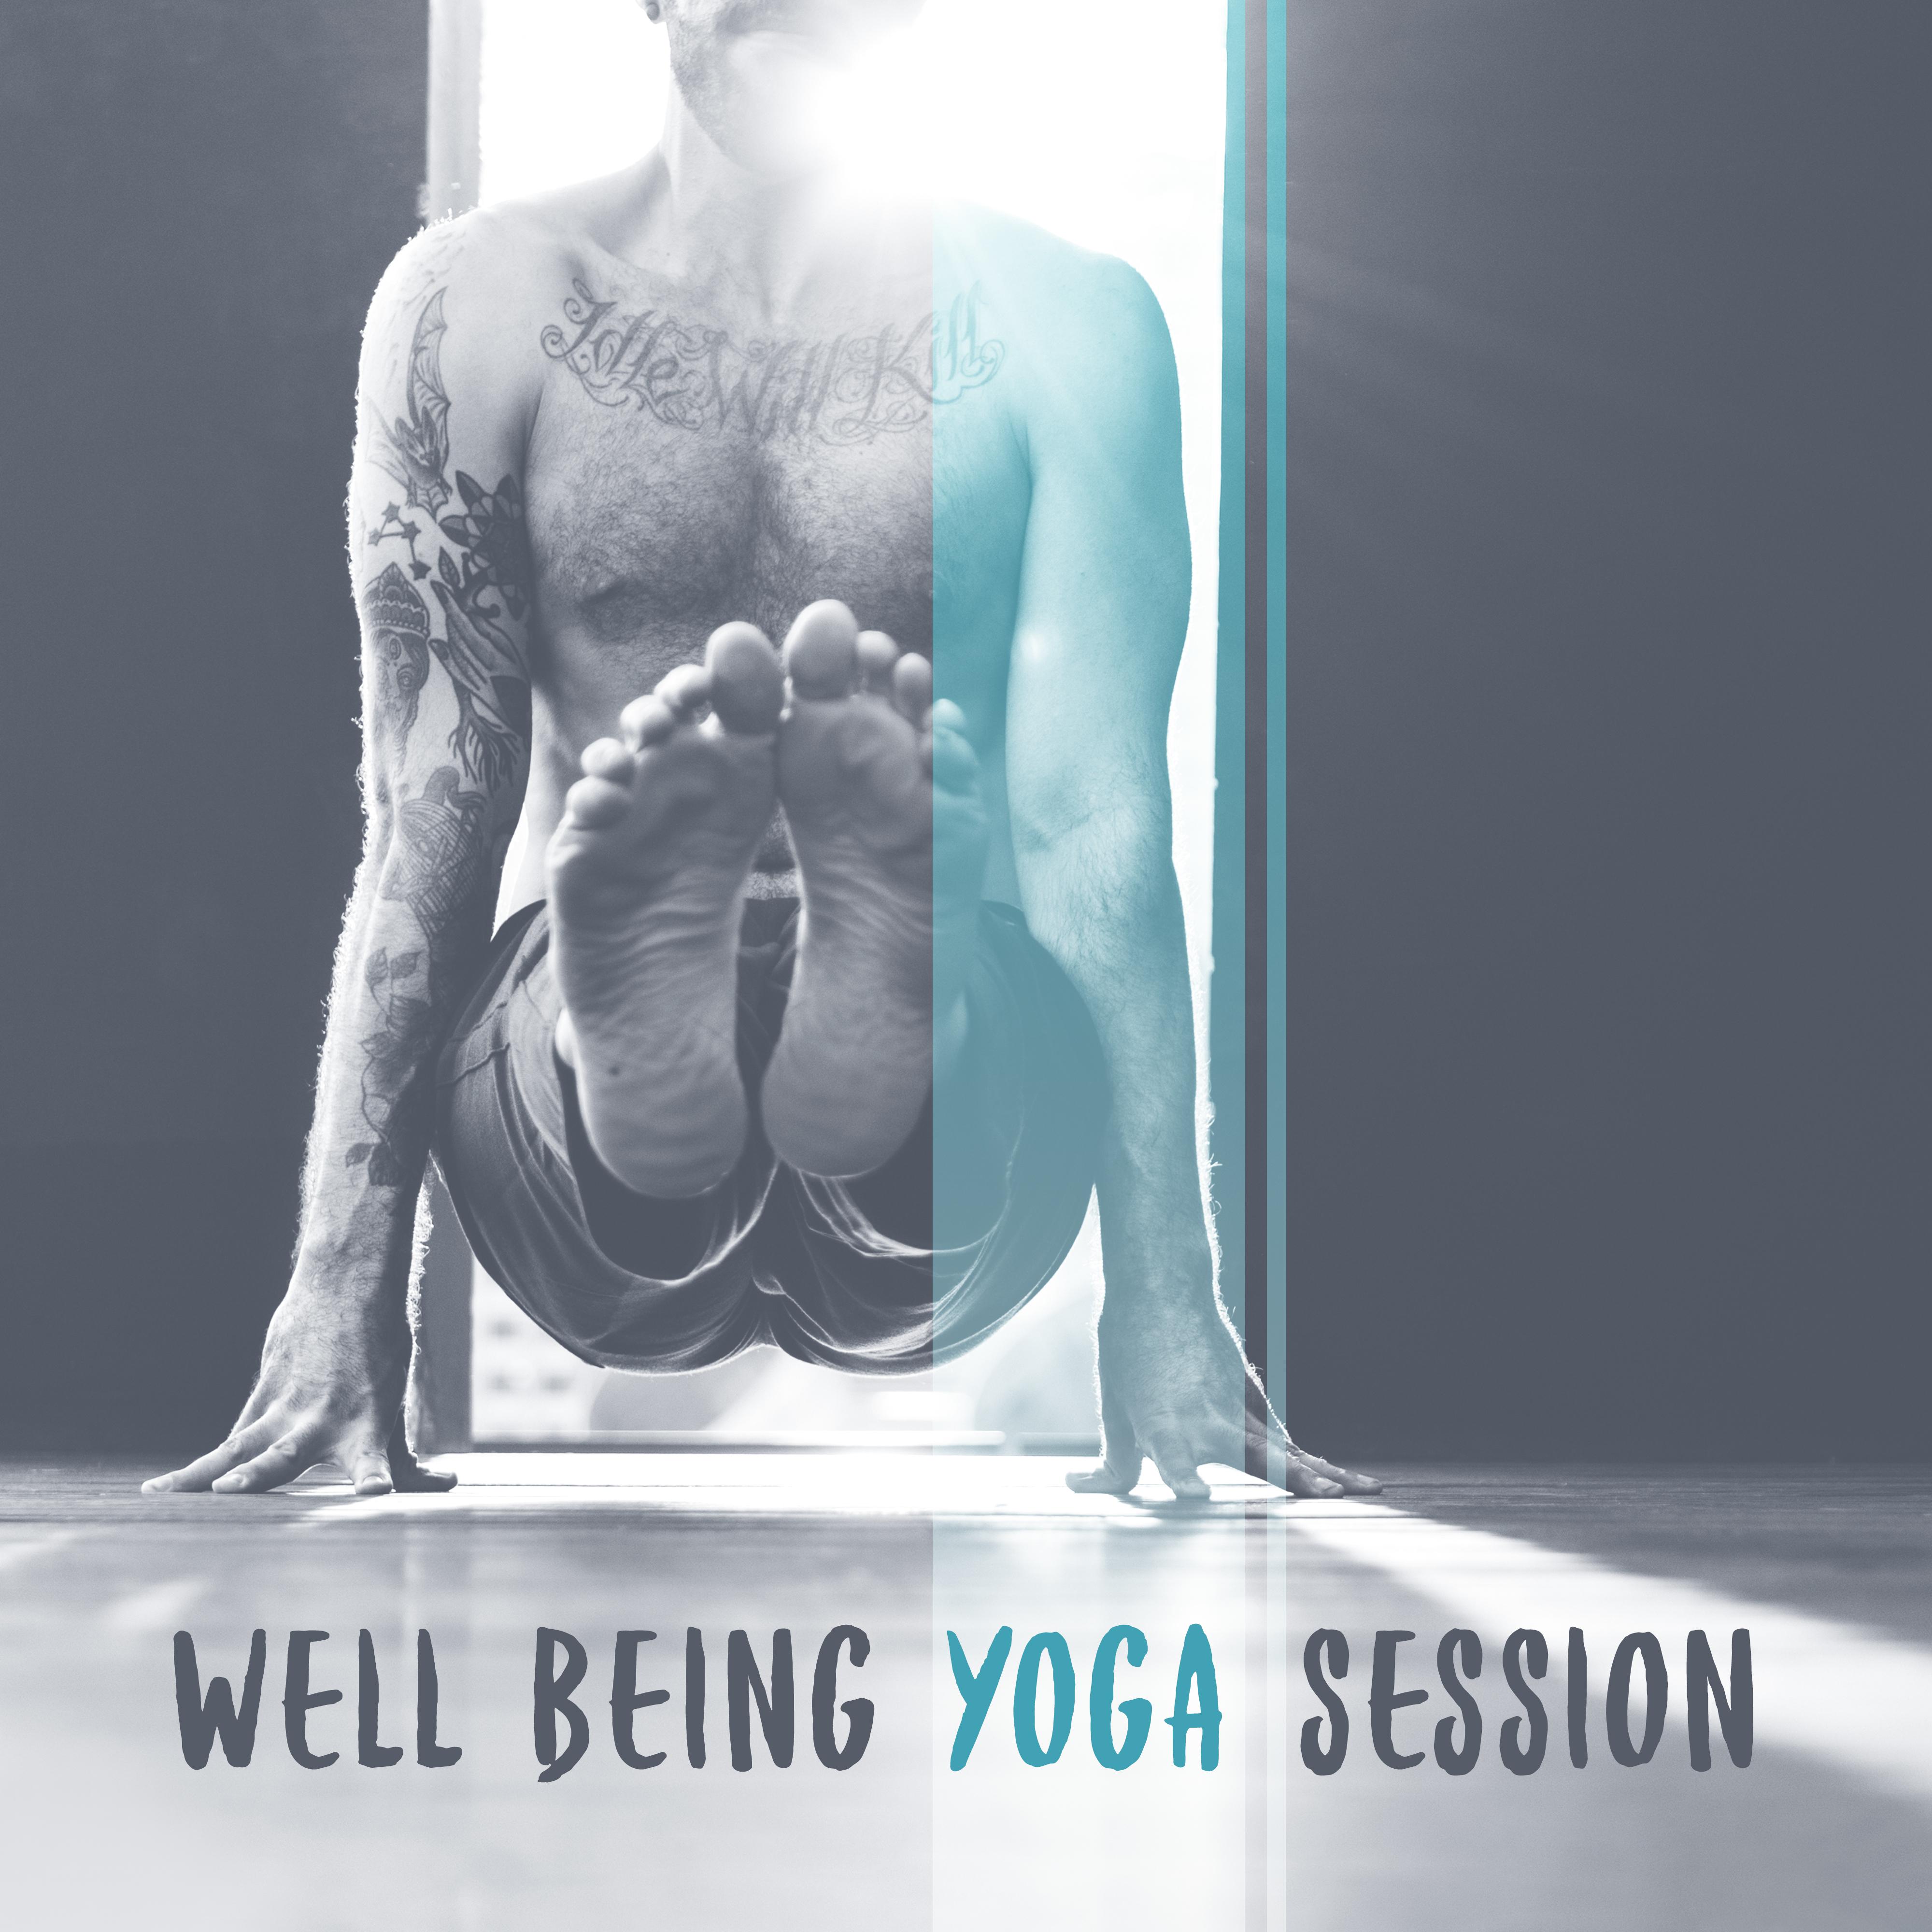 Well Being Yoga Session: 2019 New Age Music, Deep Ambient Sounds, Meditation & Relaxation Perfect Background, Zen, Mantra, Buddha Lounge